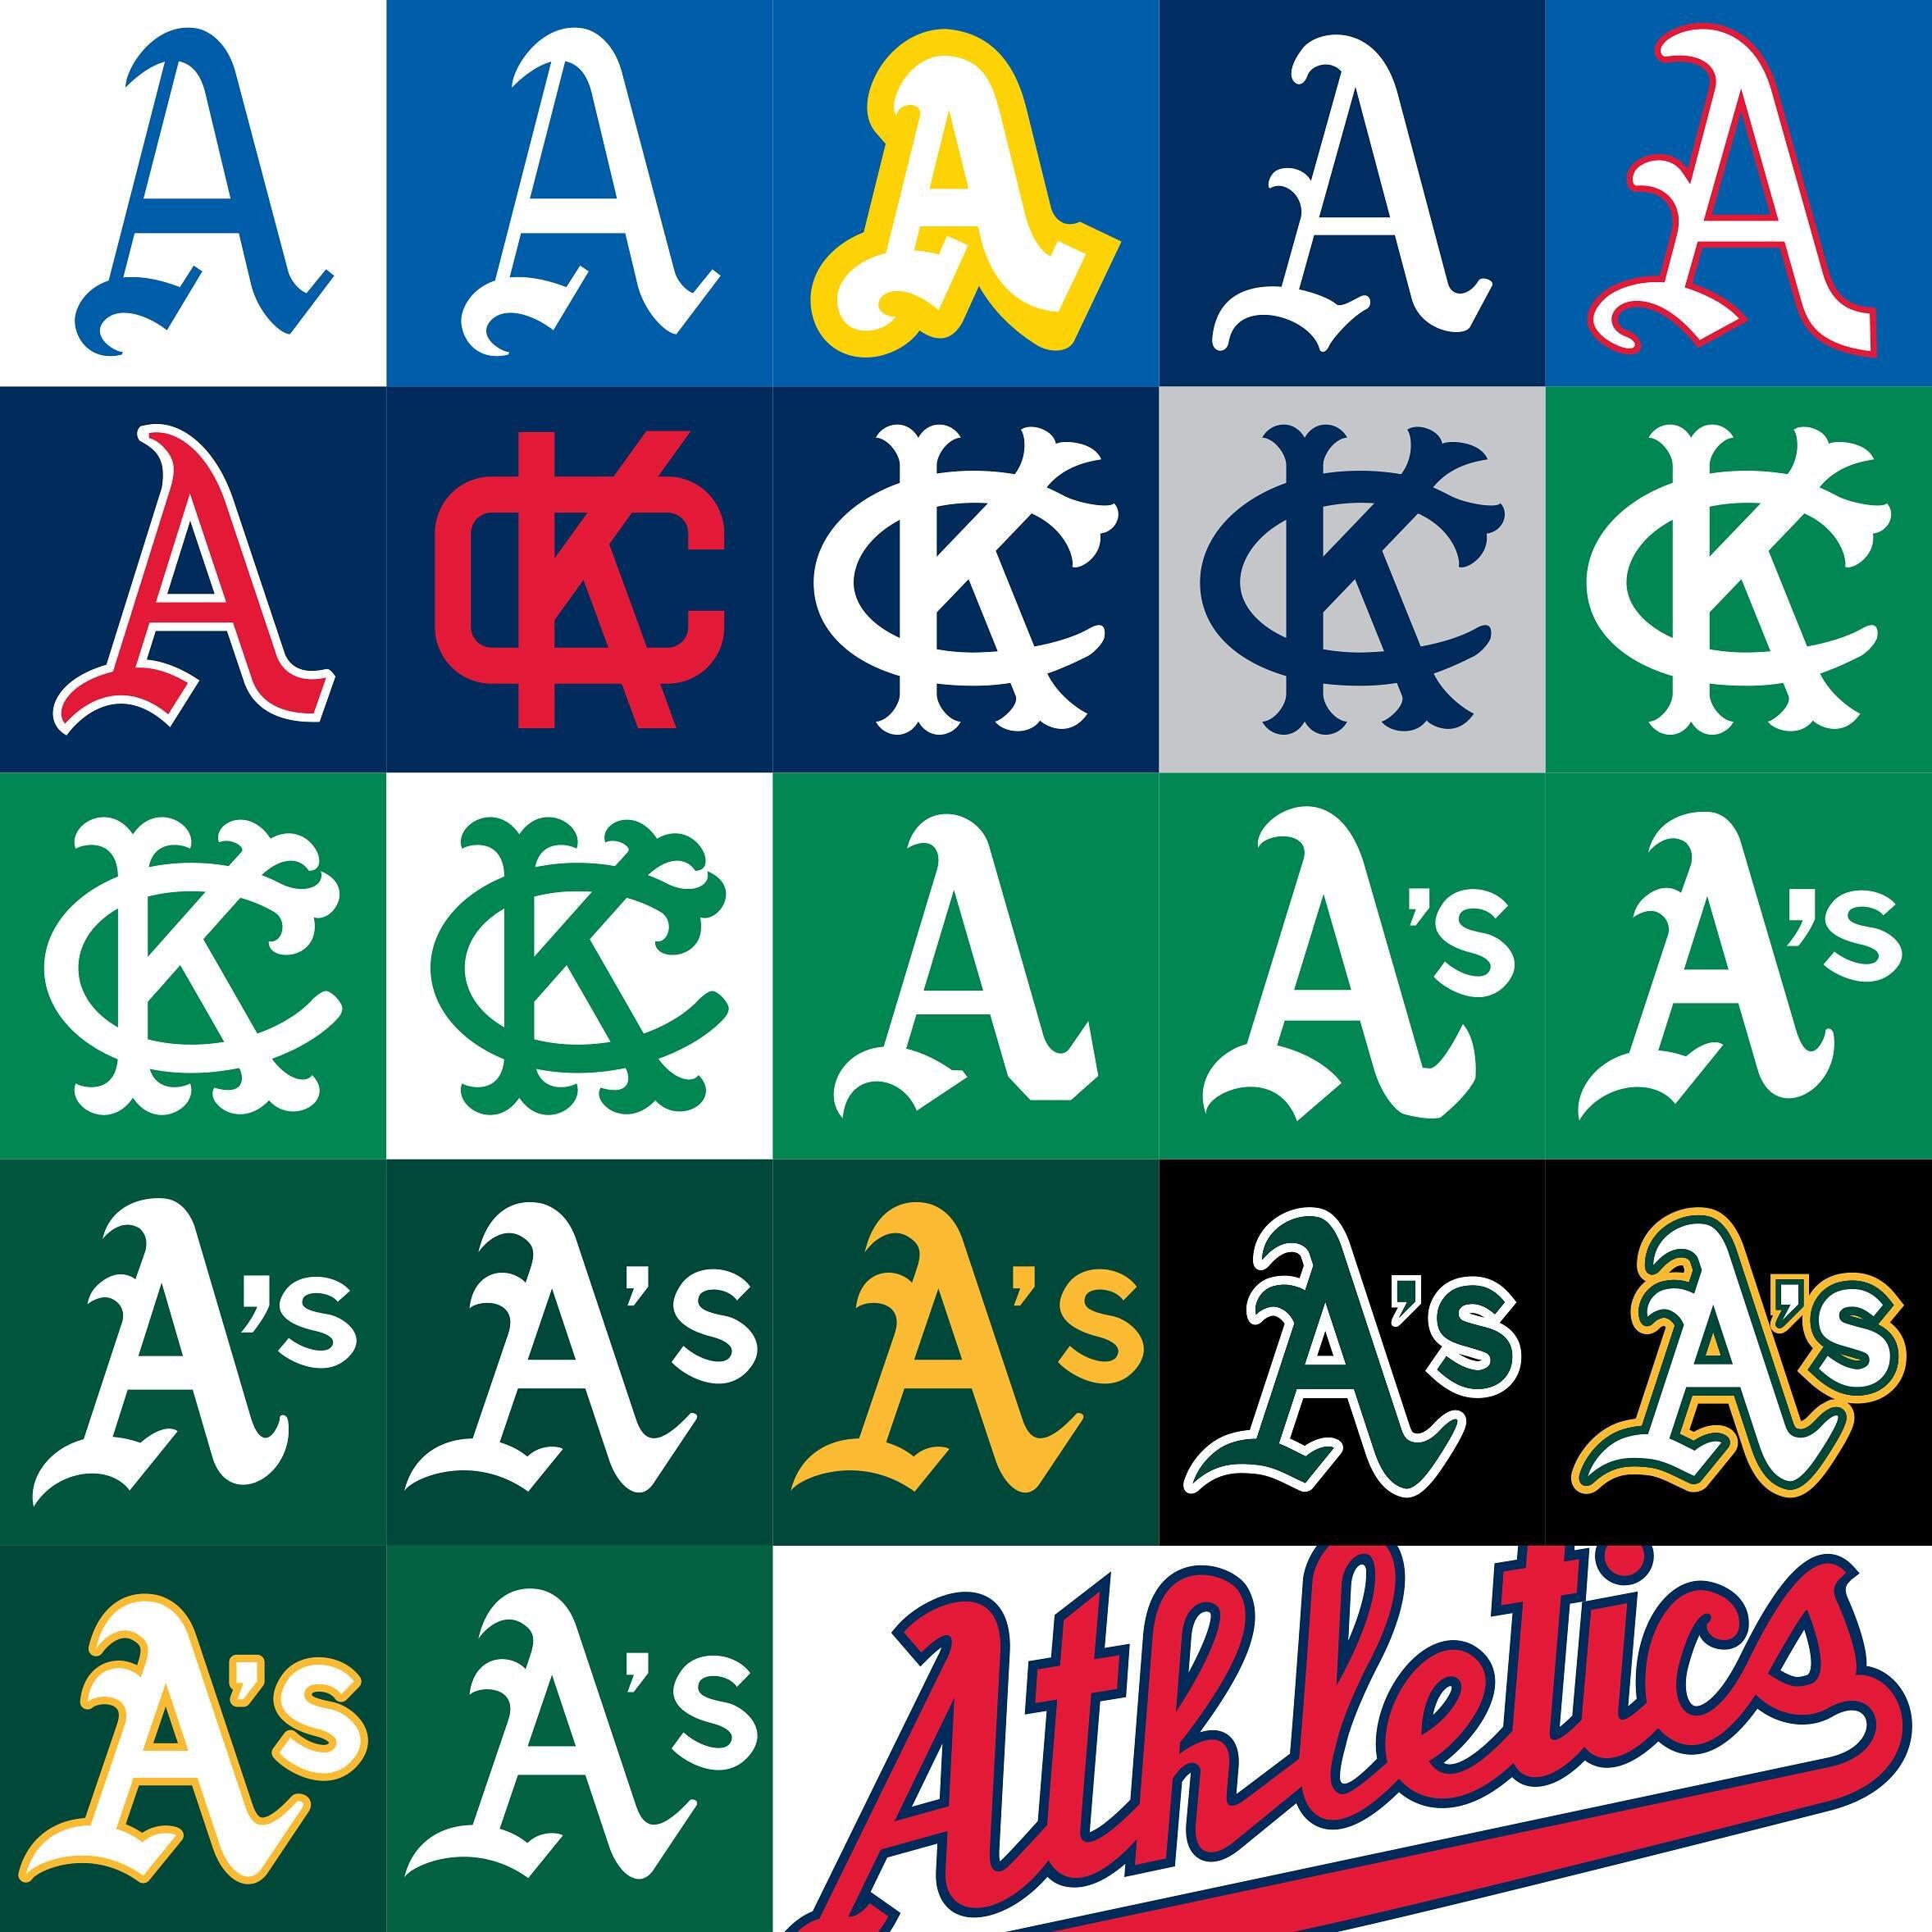 As the Athletics get ready to move to Sacramento, a look at every regular rotation cap logo across their history, 22 total. Their first mark was utilized in 1929, in Philadelphia. The gold and blue version was used for one year, 1950, in celebration 